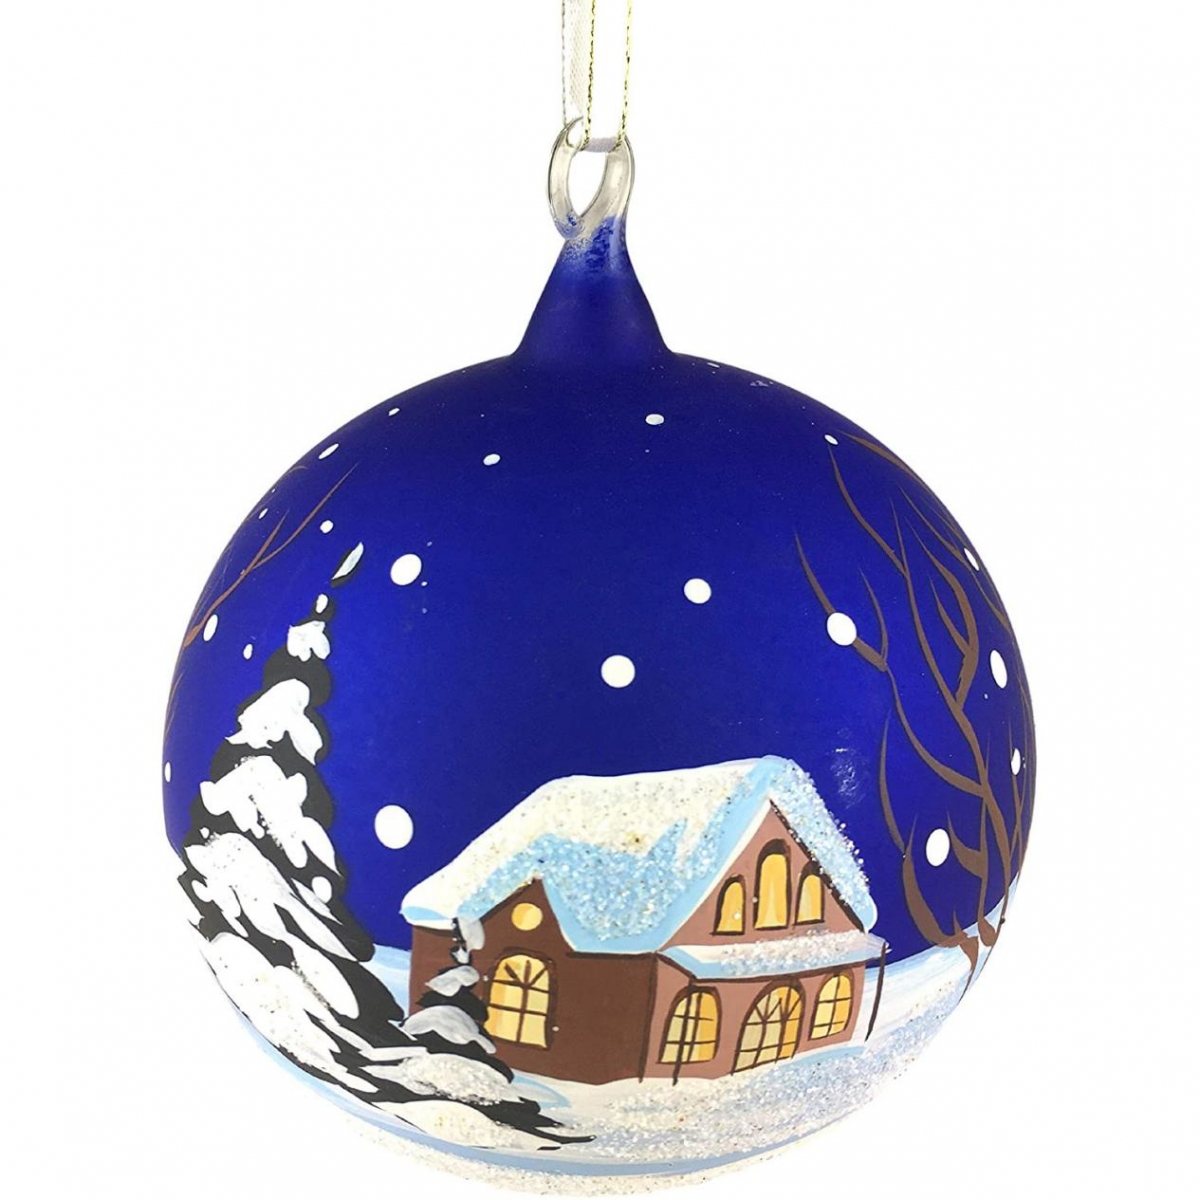 8CM Hand-Painted Vintage Church in Glass Ball Ornament-GOON- Home Decoration, Christmas Decoration, Halloween Decor, Harvest Decor, Easter Decor, Thanksgiving Day Decor, Party Decor